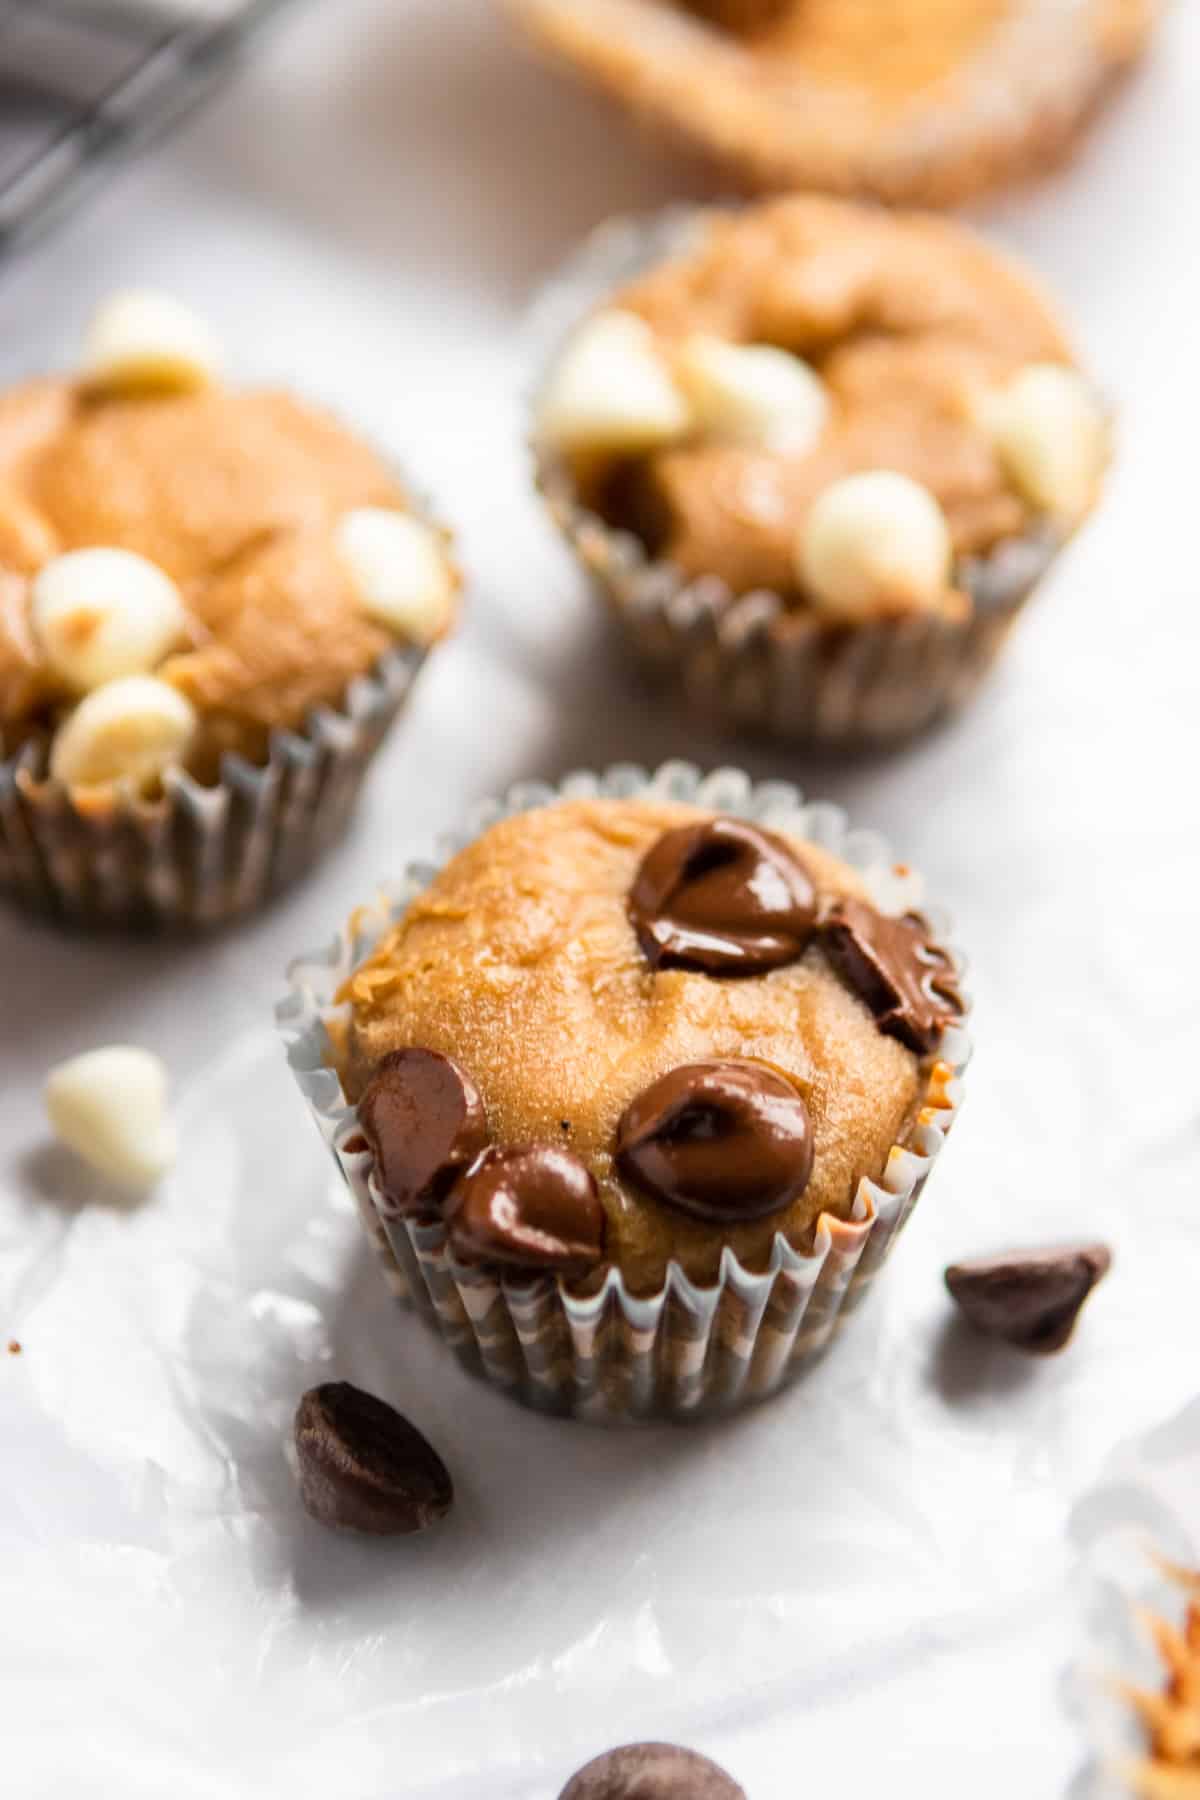 Mini muffins with chocolate chips melted on top laying on top of parchment.